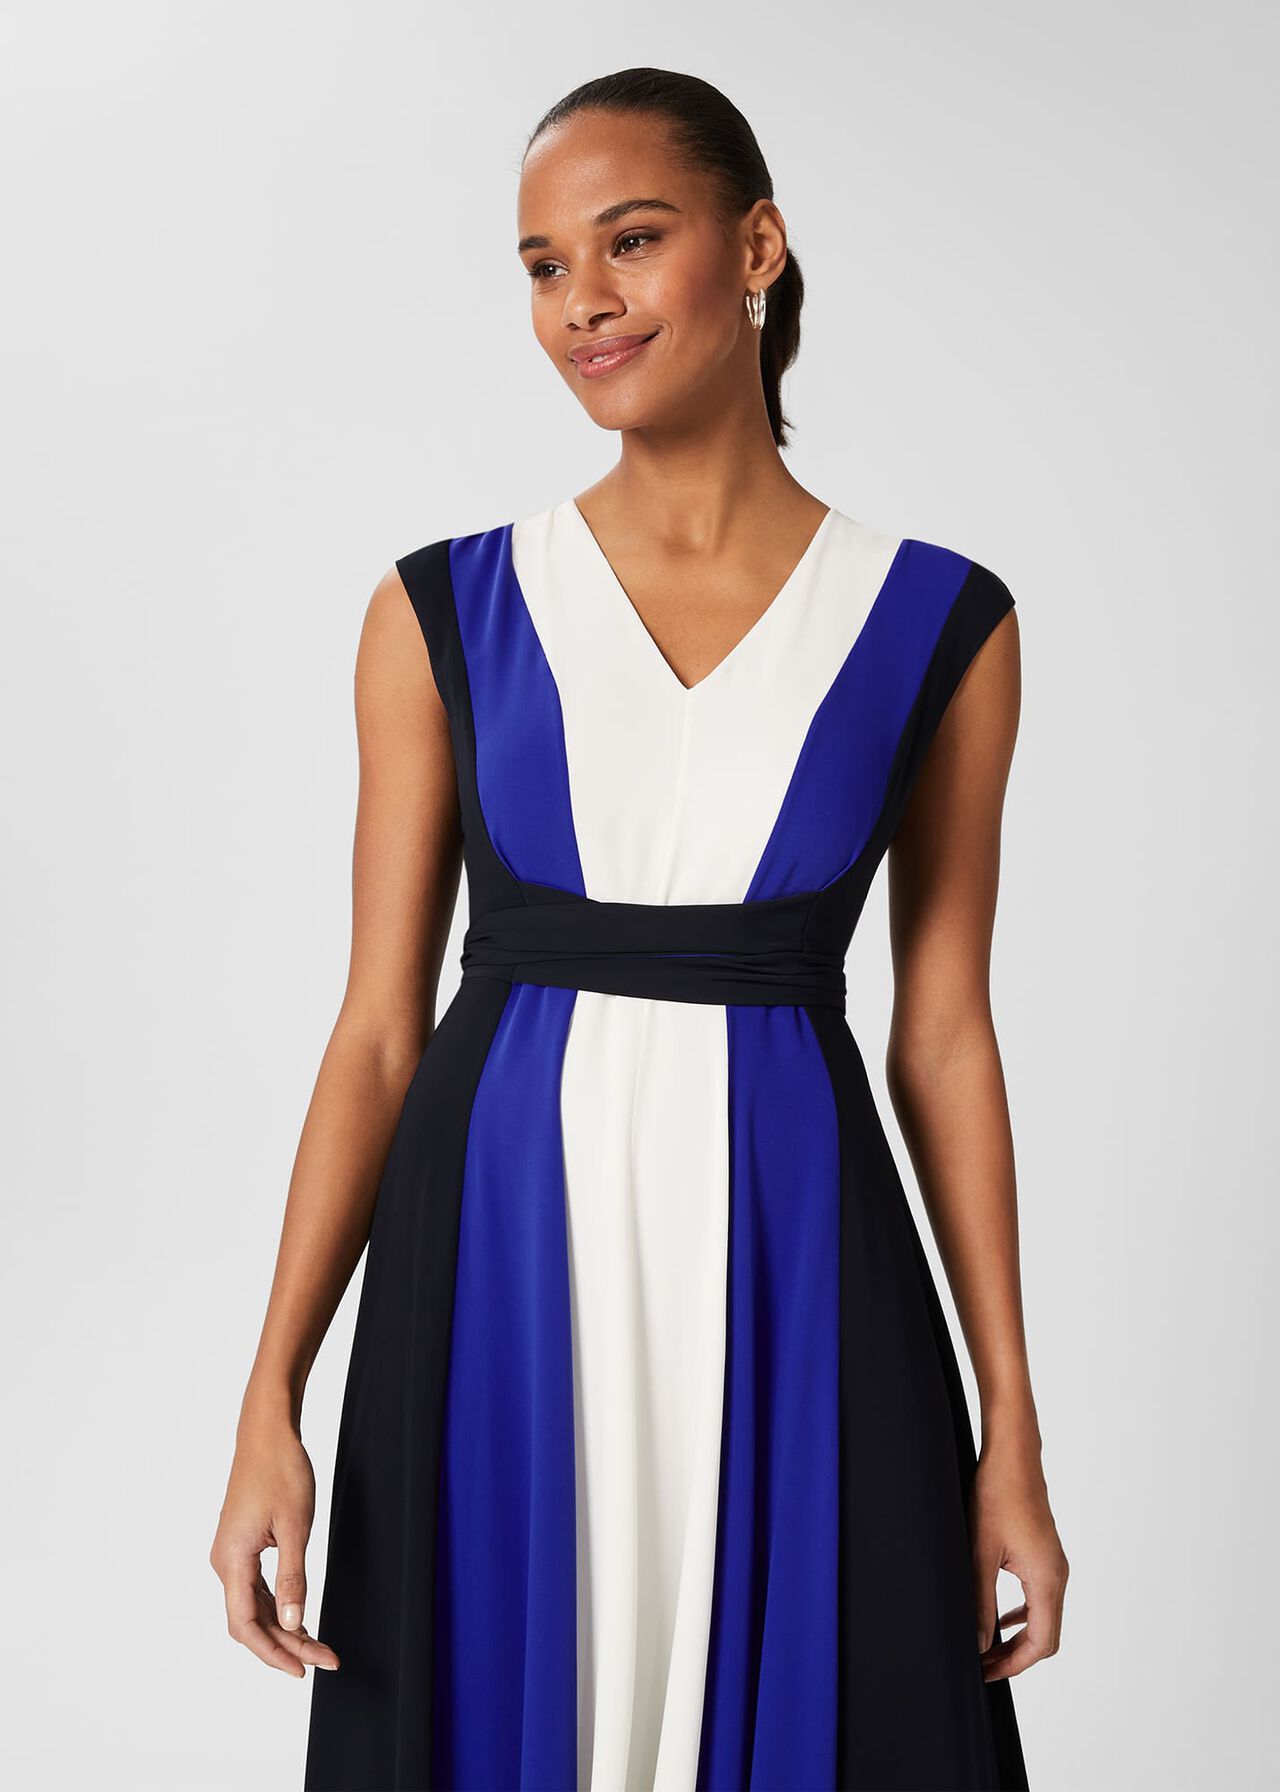 Bailly Fit And Flare Dress, Navy Cblt Ivory, hi-res